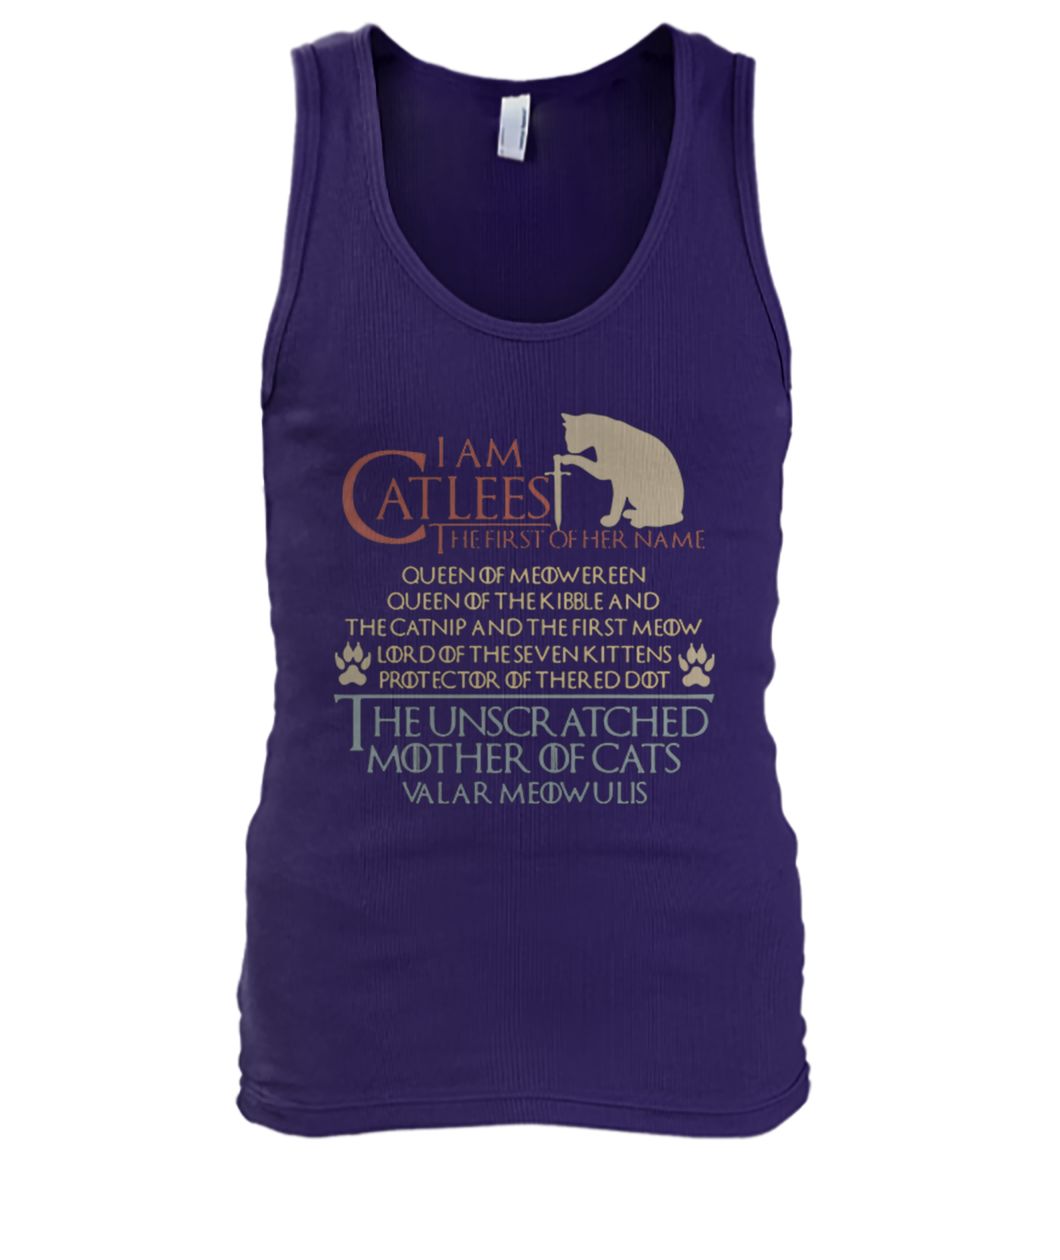 Game of thrones I am the catleesi the first of her name mother of cats men's tank top